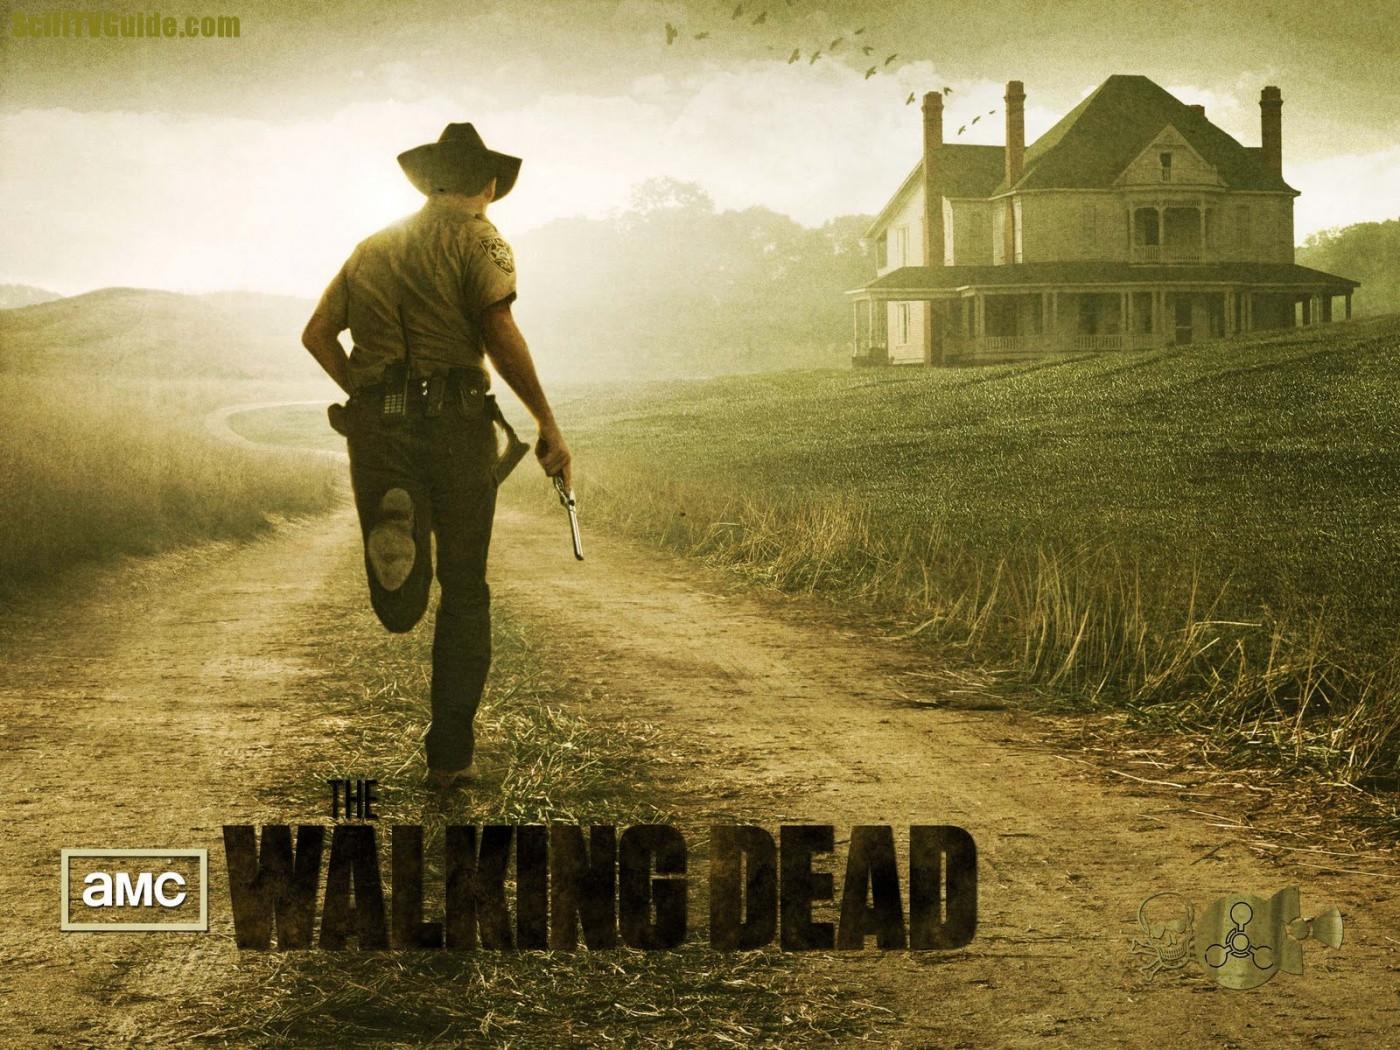 Cool The Walking Dead Wallpaper 17 26661 Images Hd Wallpapers | HD ...